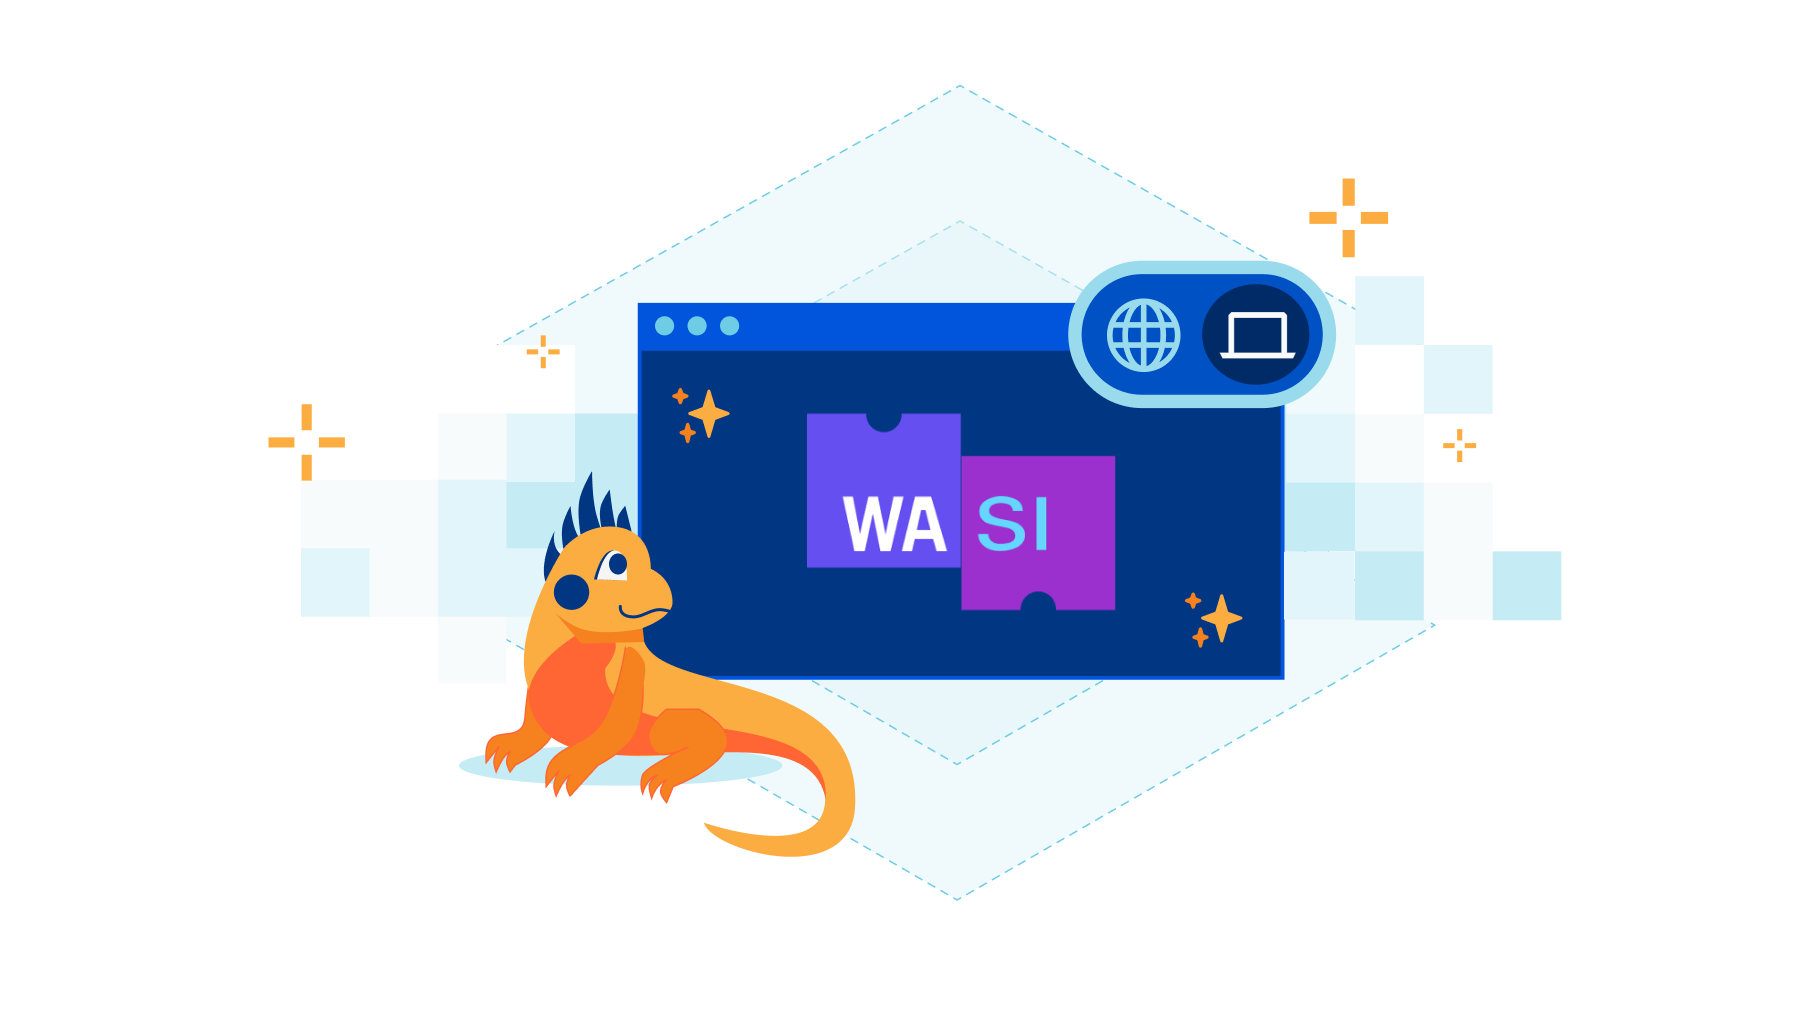 Running Zig with WASI on Cloudflare Workers